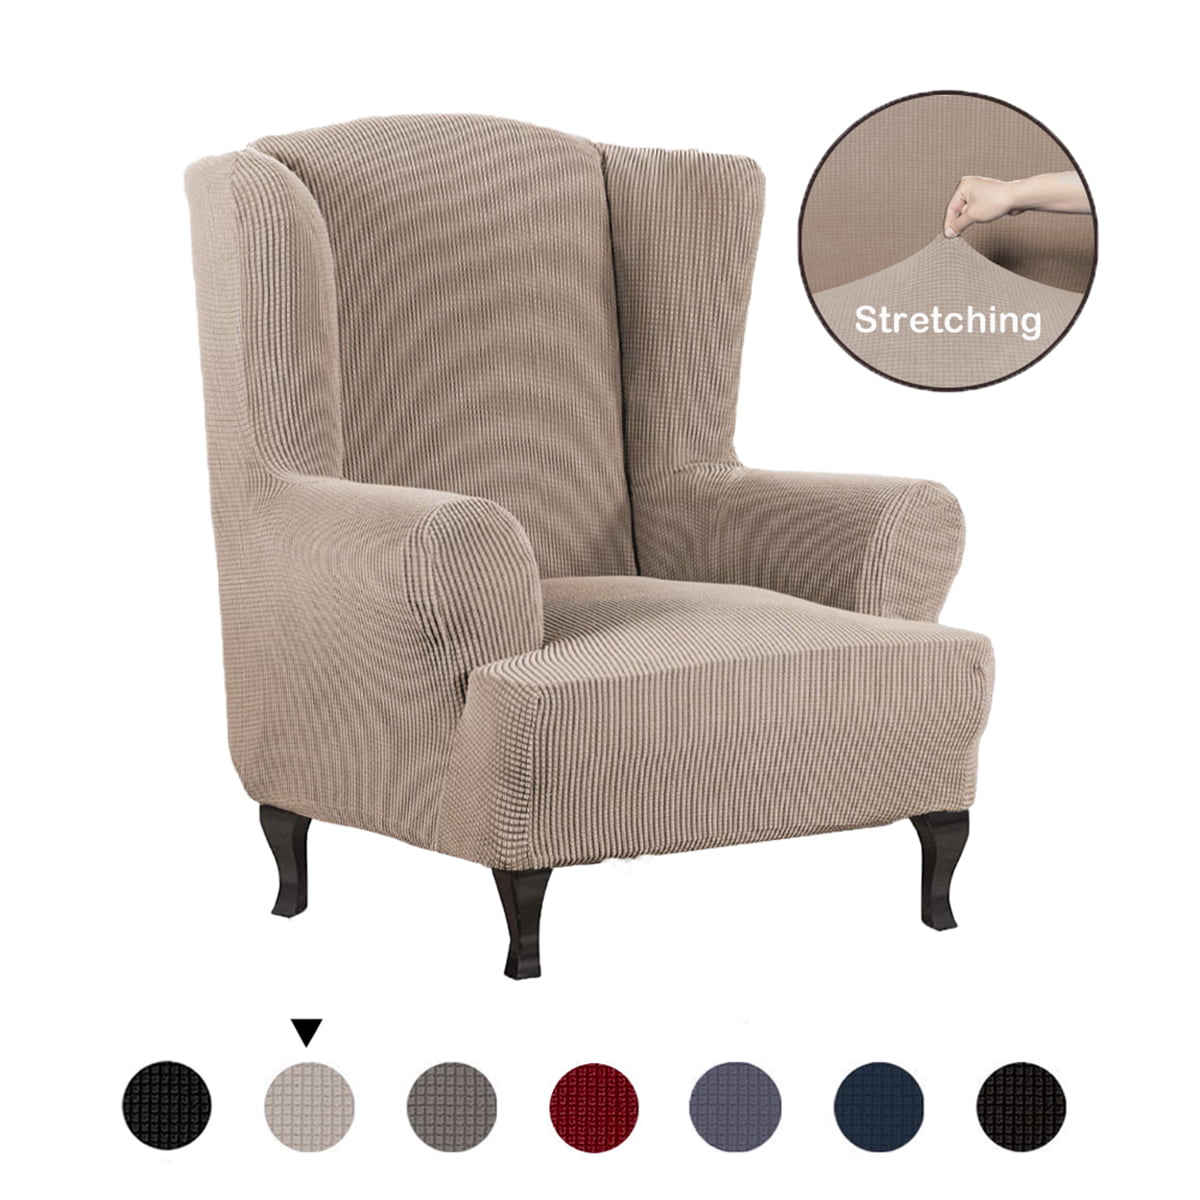 Details about   Stretch Recliner Slipcover Signal Sofa Couch Wingback Chair Silpcovers Protector 